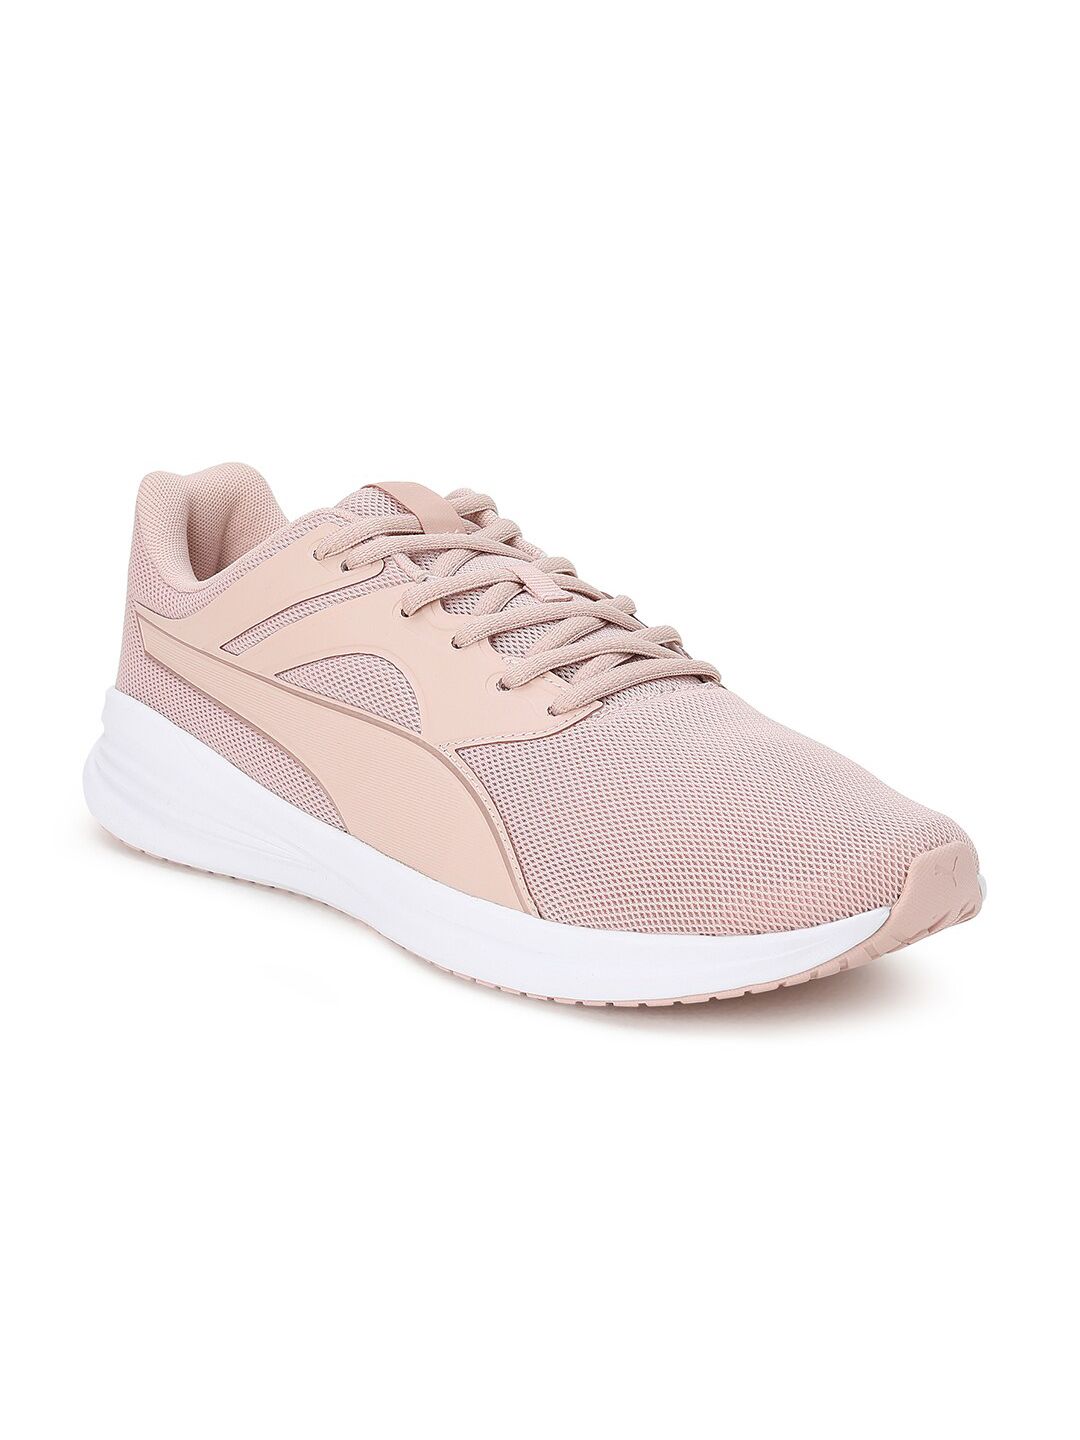 Puma Unisex Pink Textile Sports Shoes 37702807 Price in India